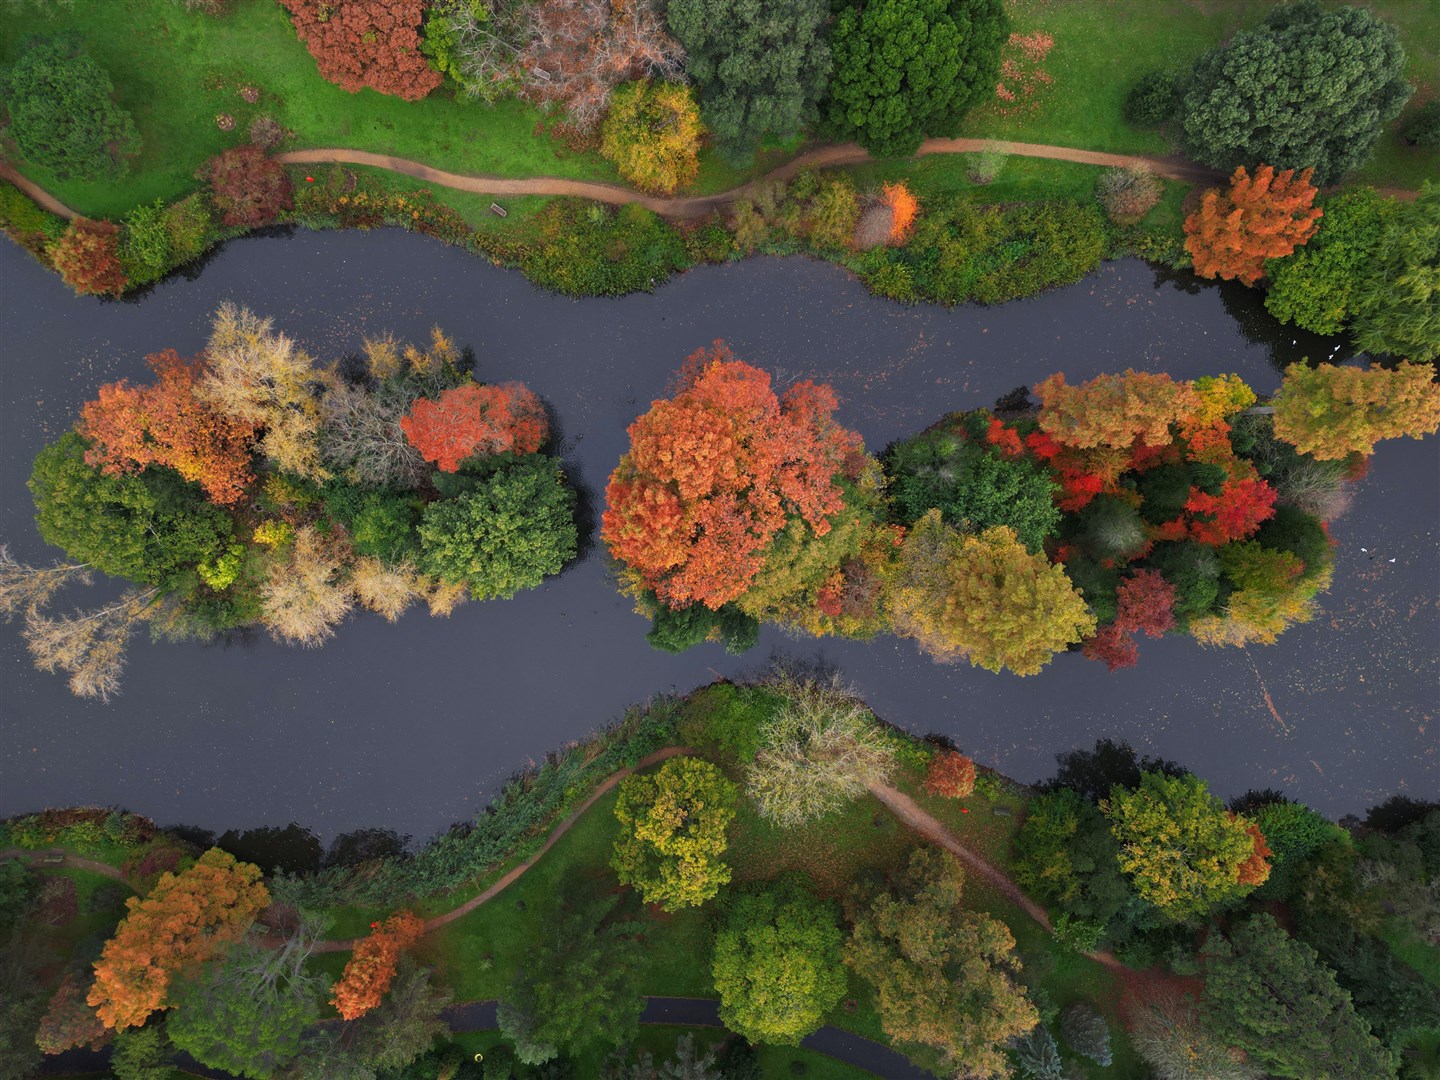 Autumn colours on display at the Royal Botanic Gardens in Kew in October (Yui Mok/PA)